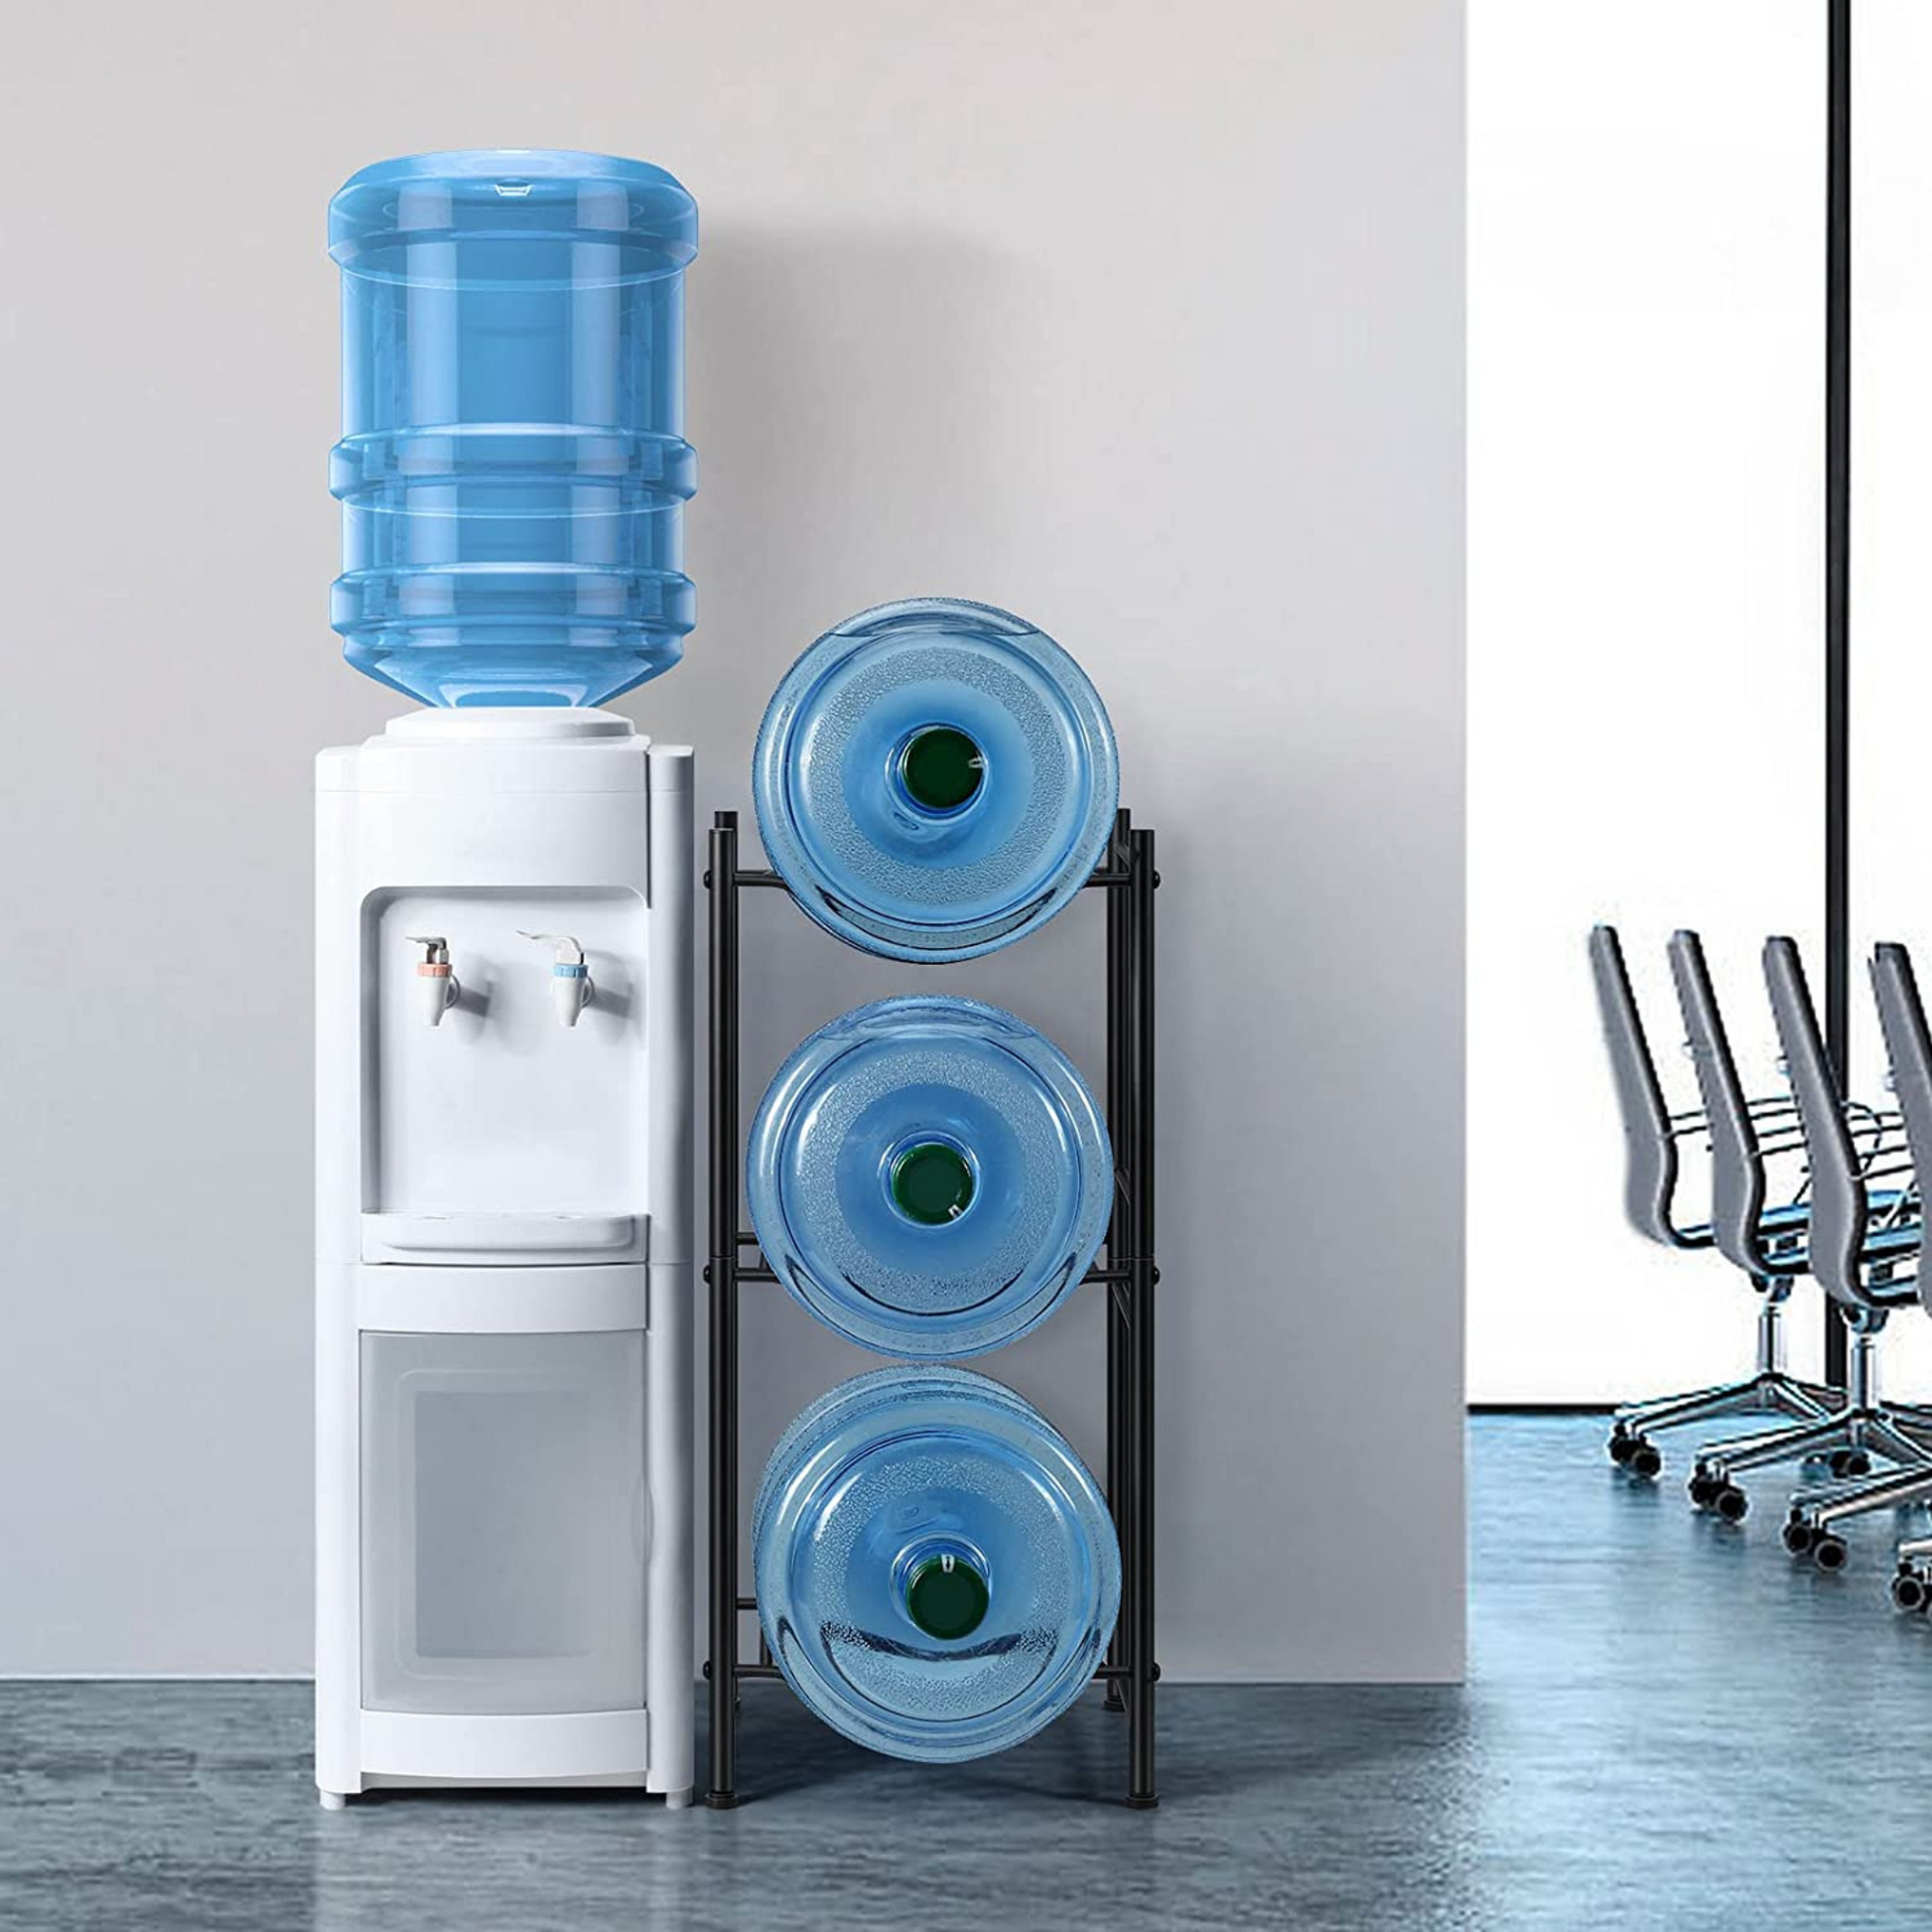 Our 3-tier water jug rack in black is a must-have for any home or office. Made of premium steel, it's a sturdy and space-saving solution that can hold up to 5 water bottles. Easy to assemble and convenient to use.